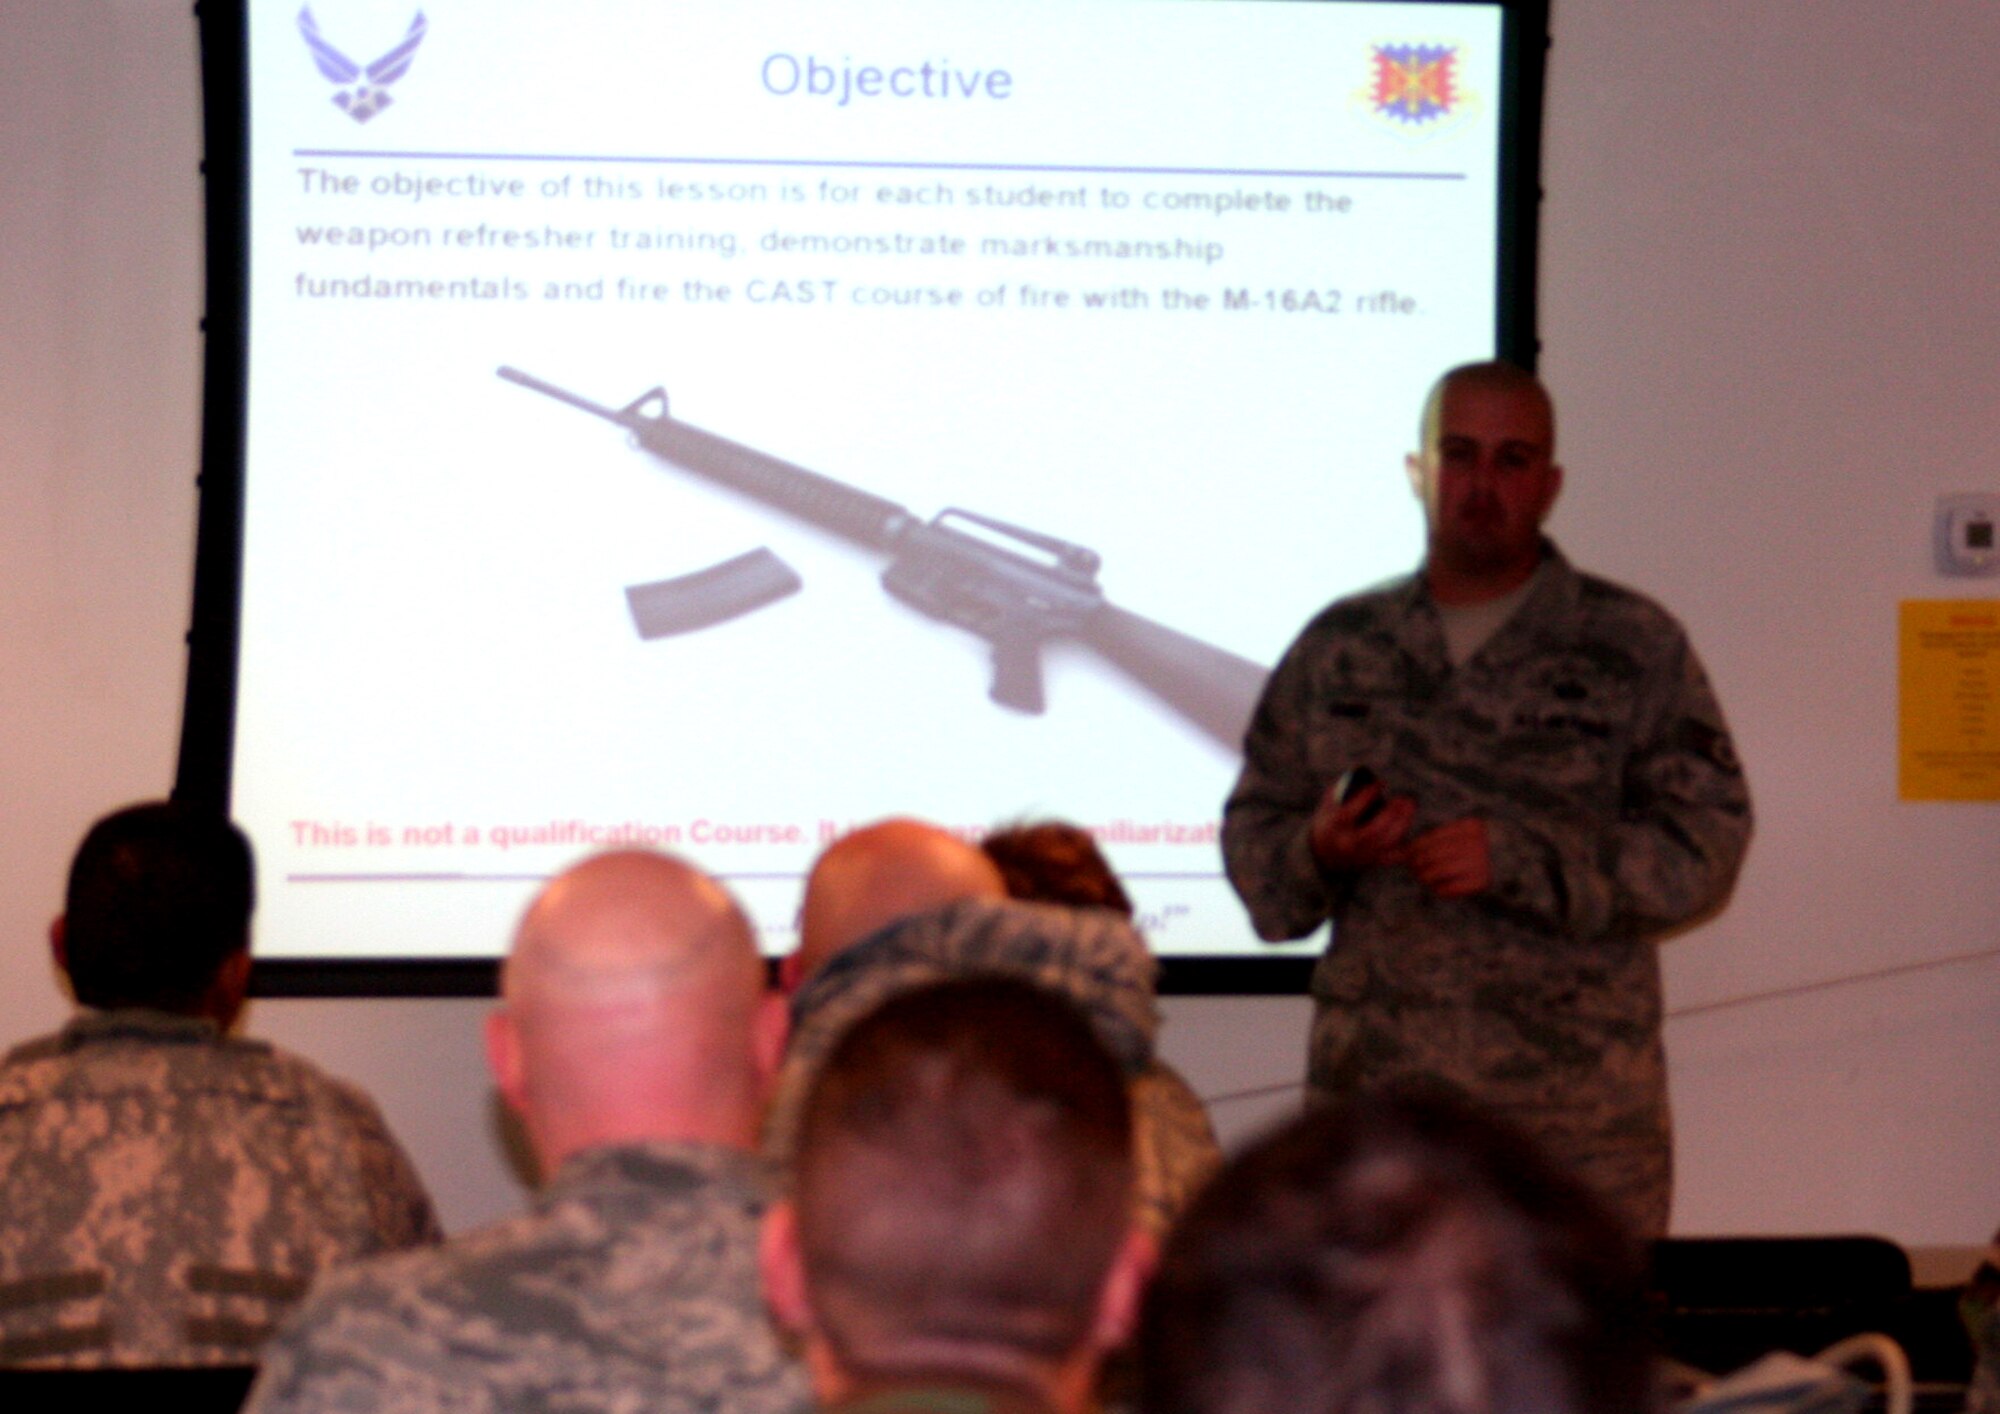 Staff Sgt. Brian Adams, combat skills instructor, provides a briefing to students in the Combat Airman Skills Training Course 10-1A on M-16 familiarization during training in the course on Nov. 7, 2009, at Joint Base McGuire-Dix-Lakehurst, N.J.  The course, taught by the U.S. Air Force Expeditionary Center's 421st Combat Training Squadron, prepare Airmen for upcoming deployments.  (U.S. Air Force Photo/Tech. Sgt. Scott T. Sturkol)